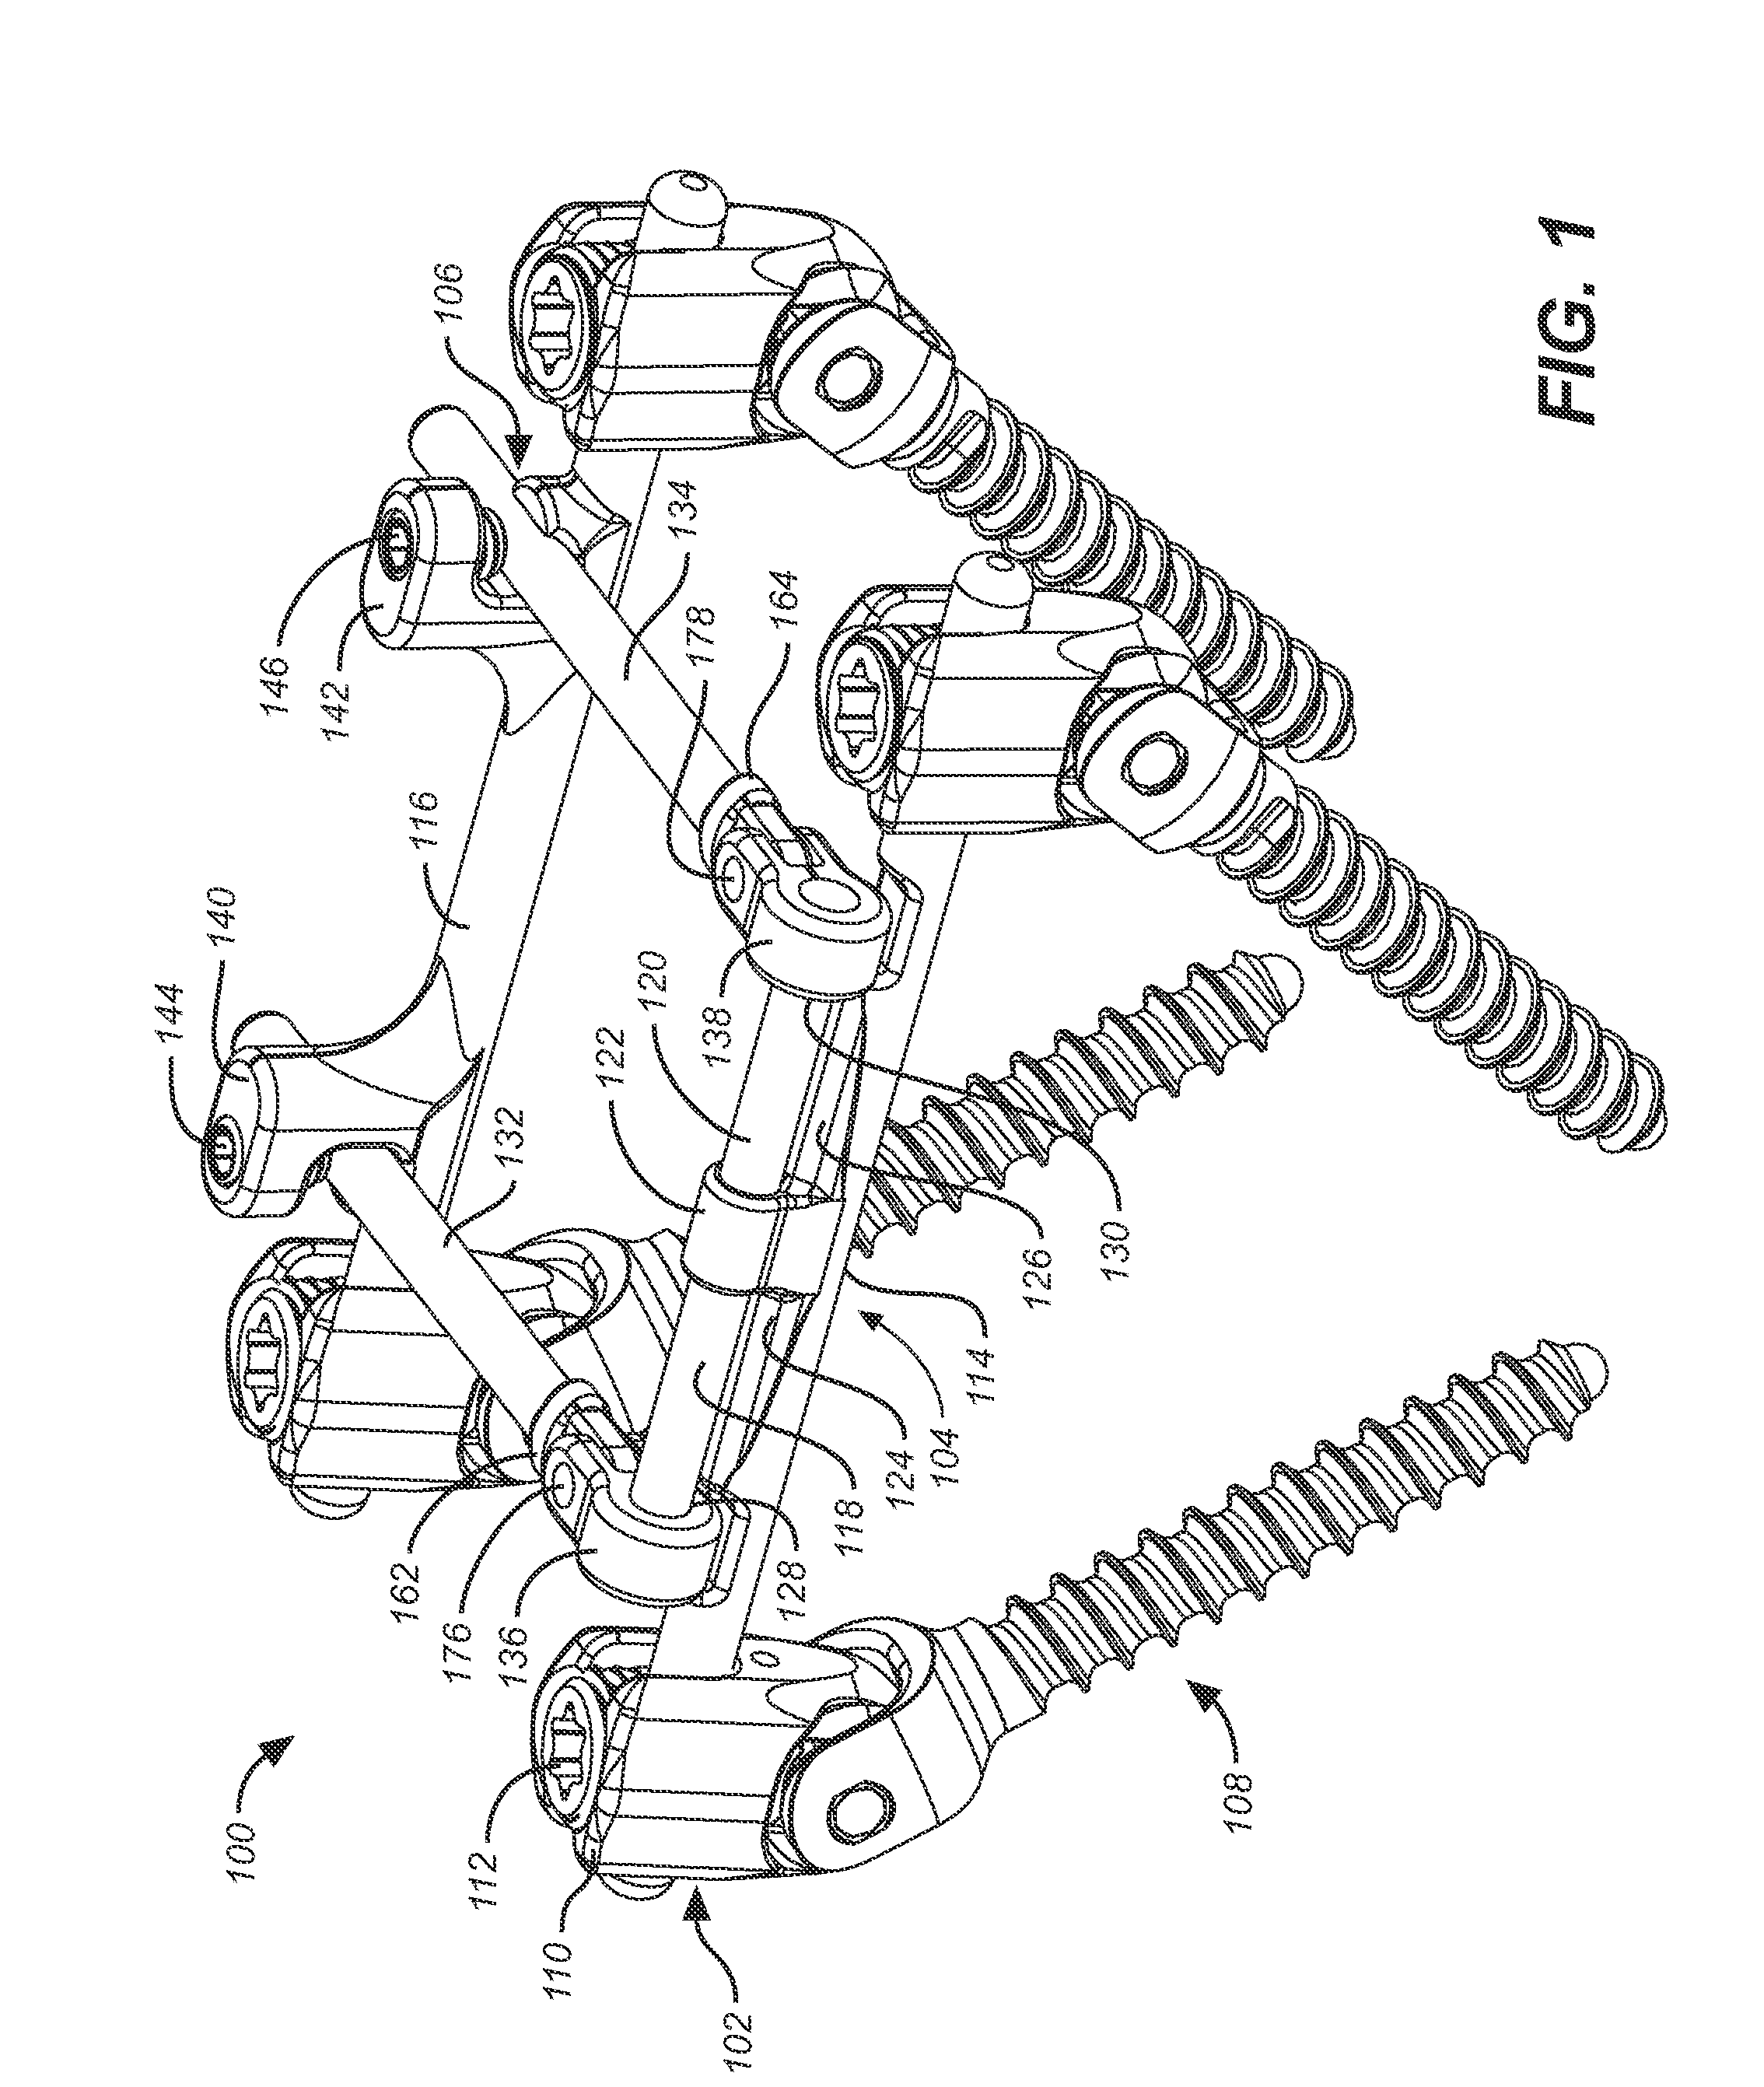 Dynamic stabilization and motion preservation spinal implantation system and method